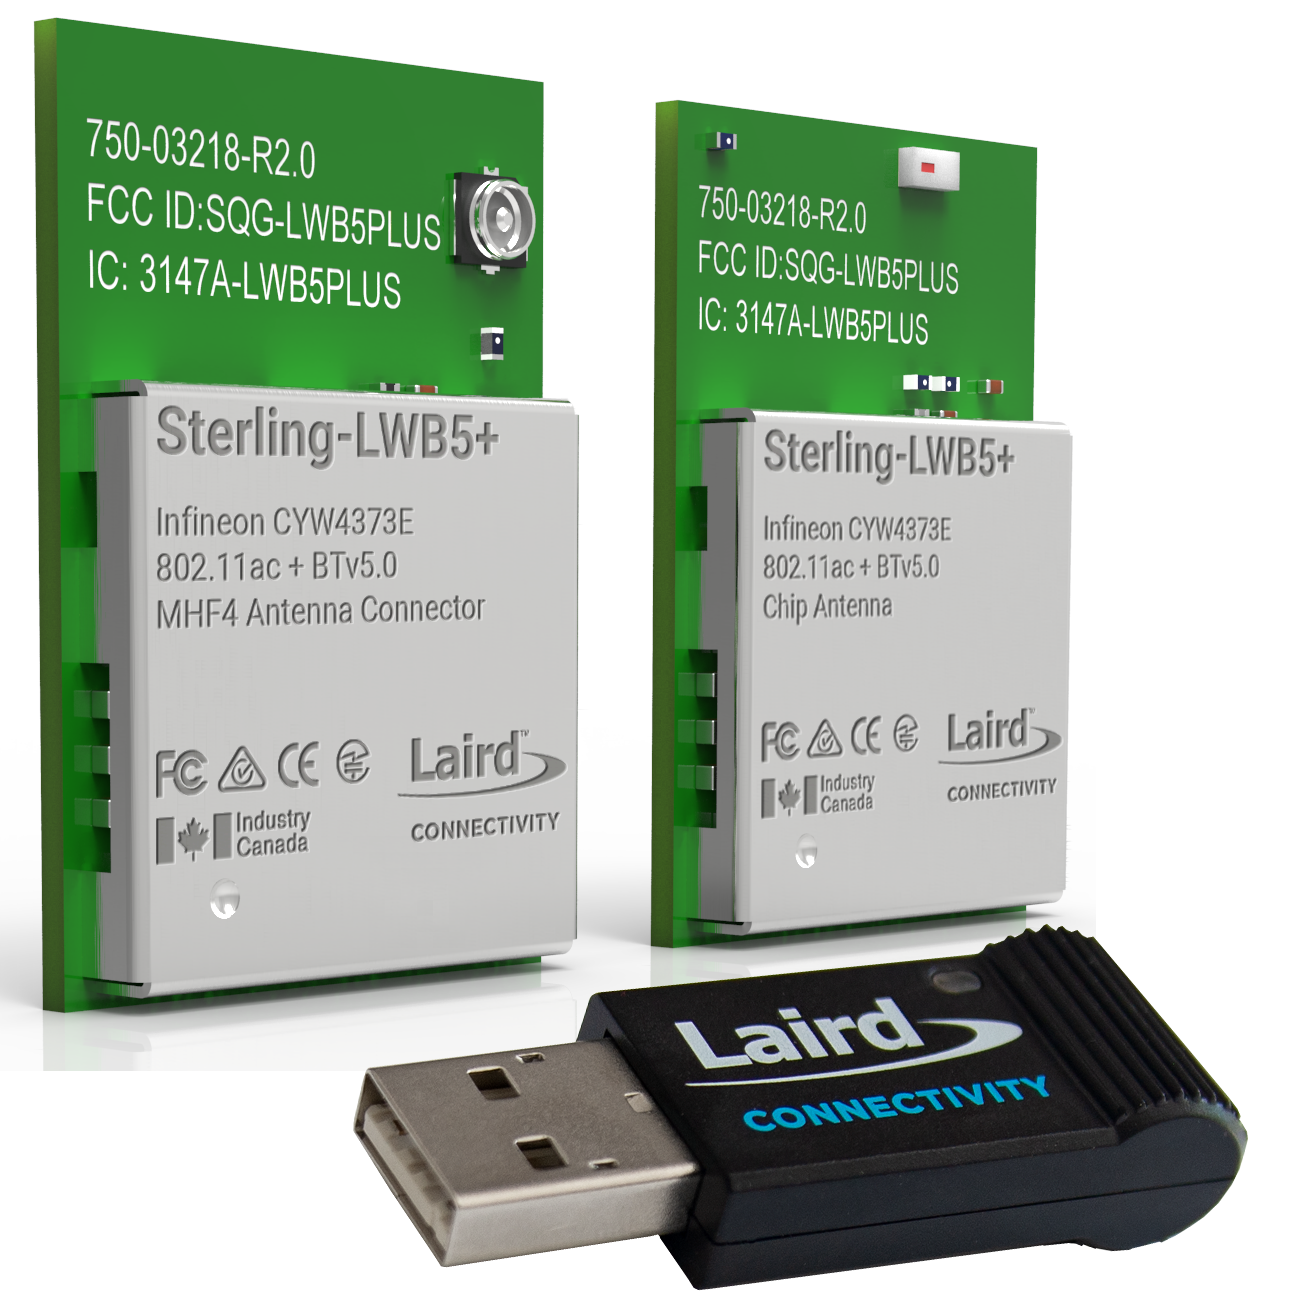 Laird Connectivity Launches Wi-Fi 5 USB Adapter for Embedded Devices